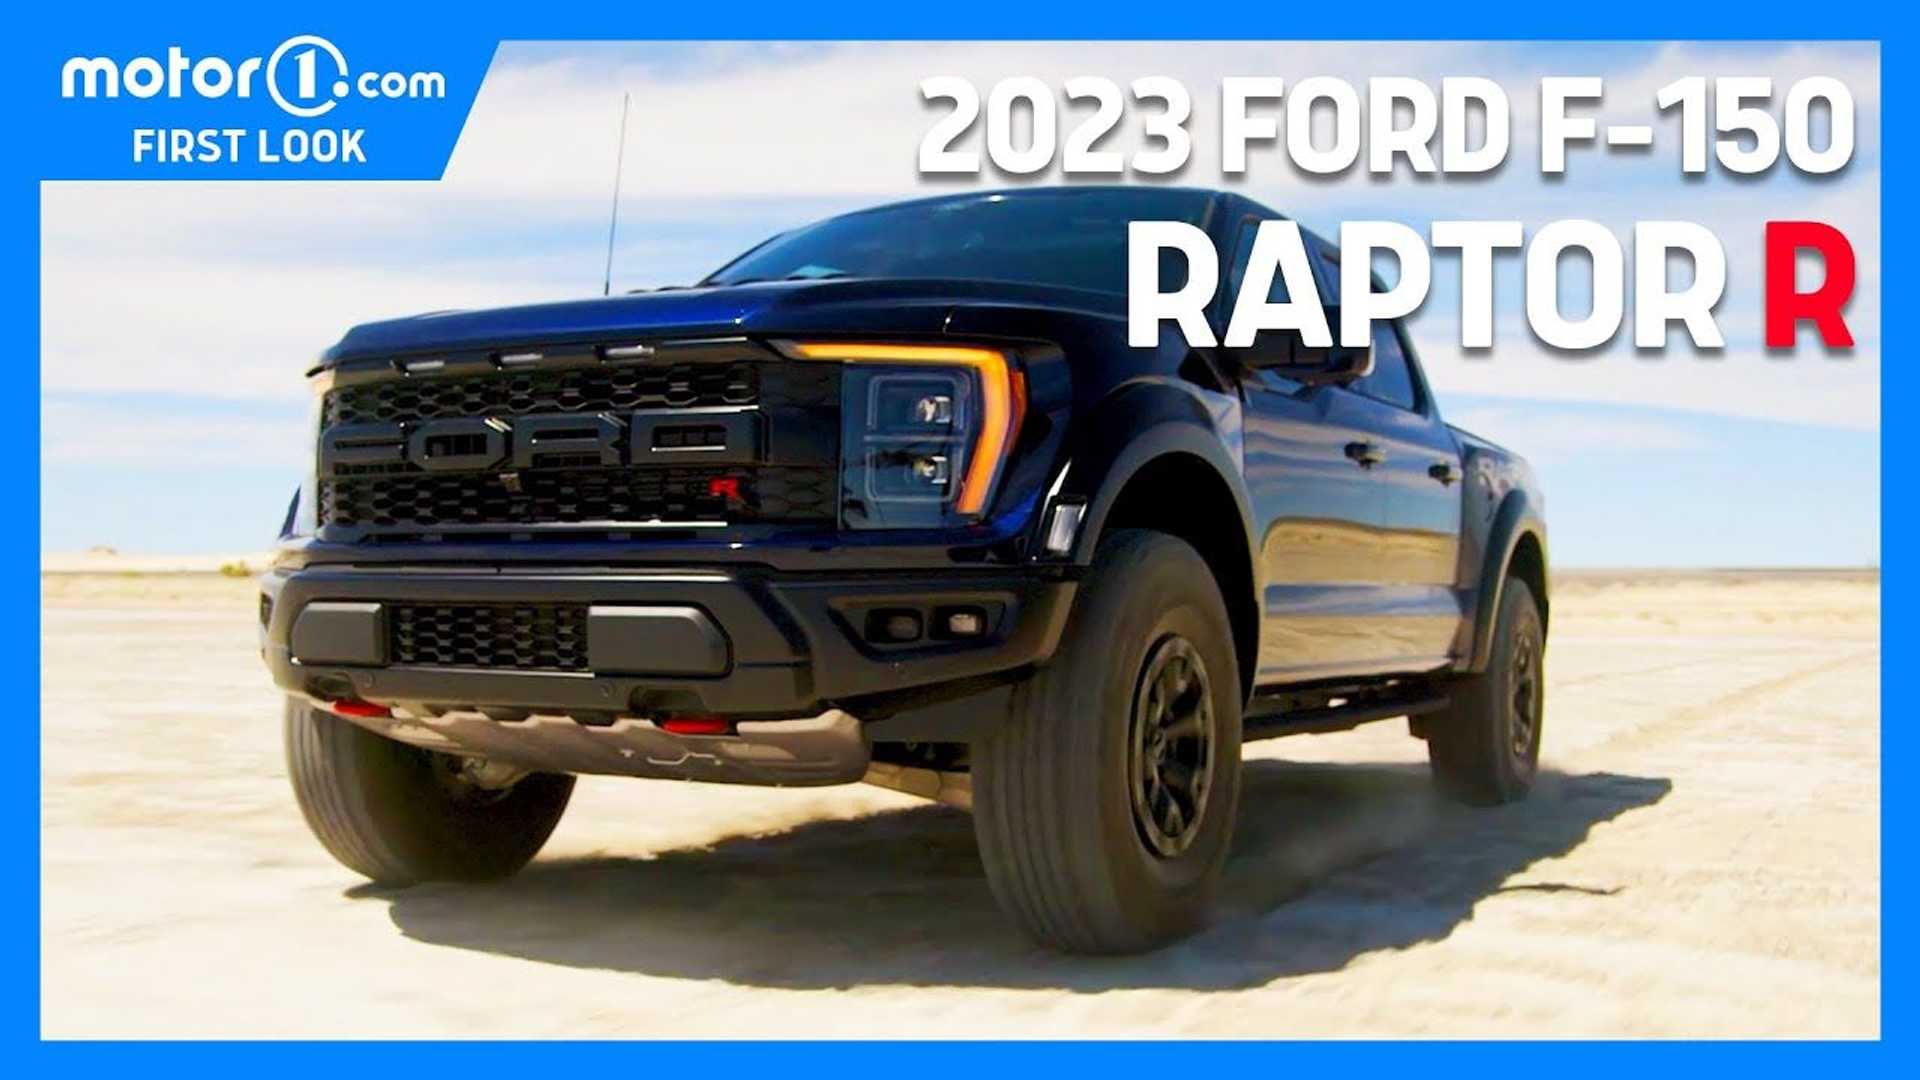 2023 Ford F 150 Raptor R Matches 700 Horsepower With $000 Price Tag